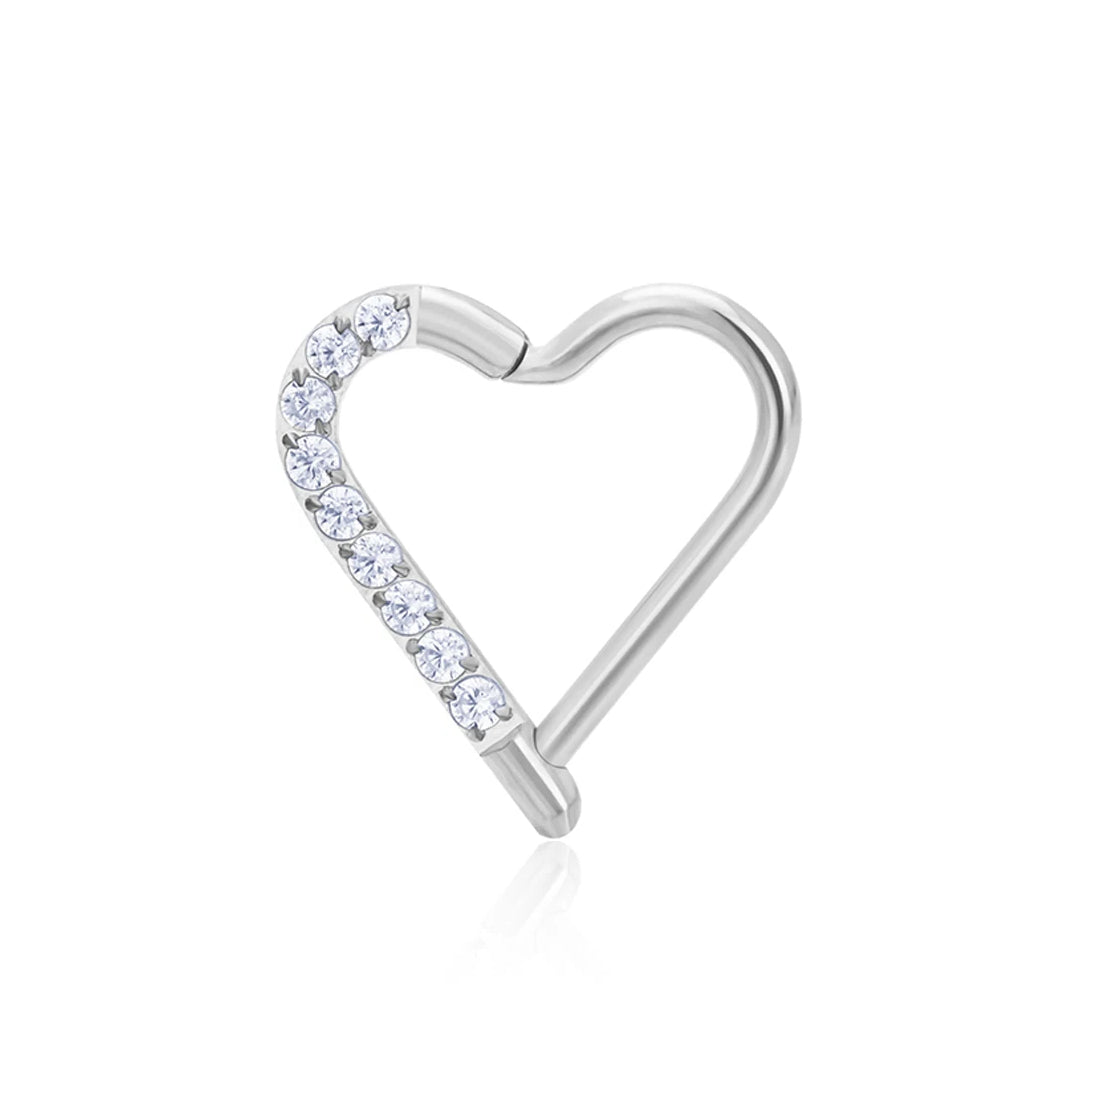 Daith heart piercing gold and silver daith ring titanium 16G with CZ stones hinged segment clicker